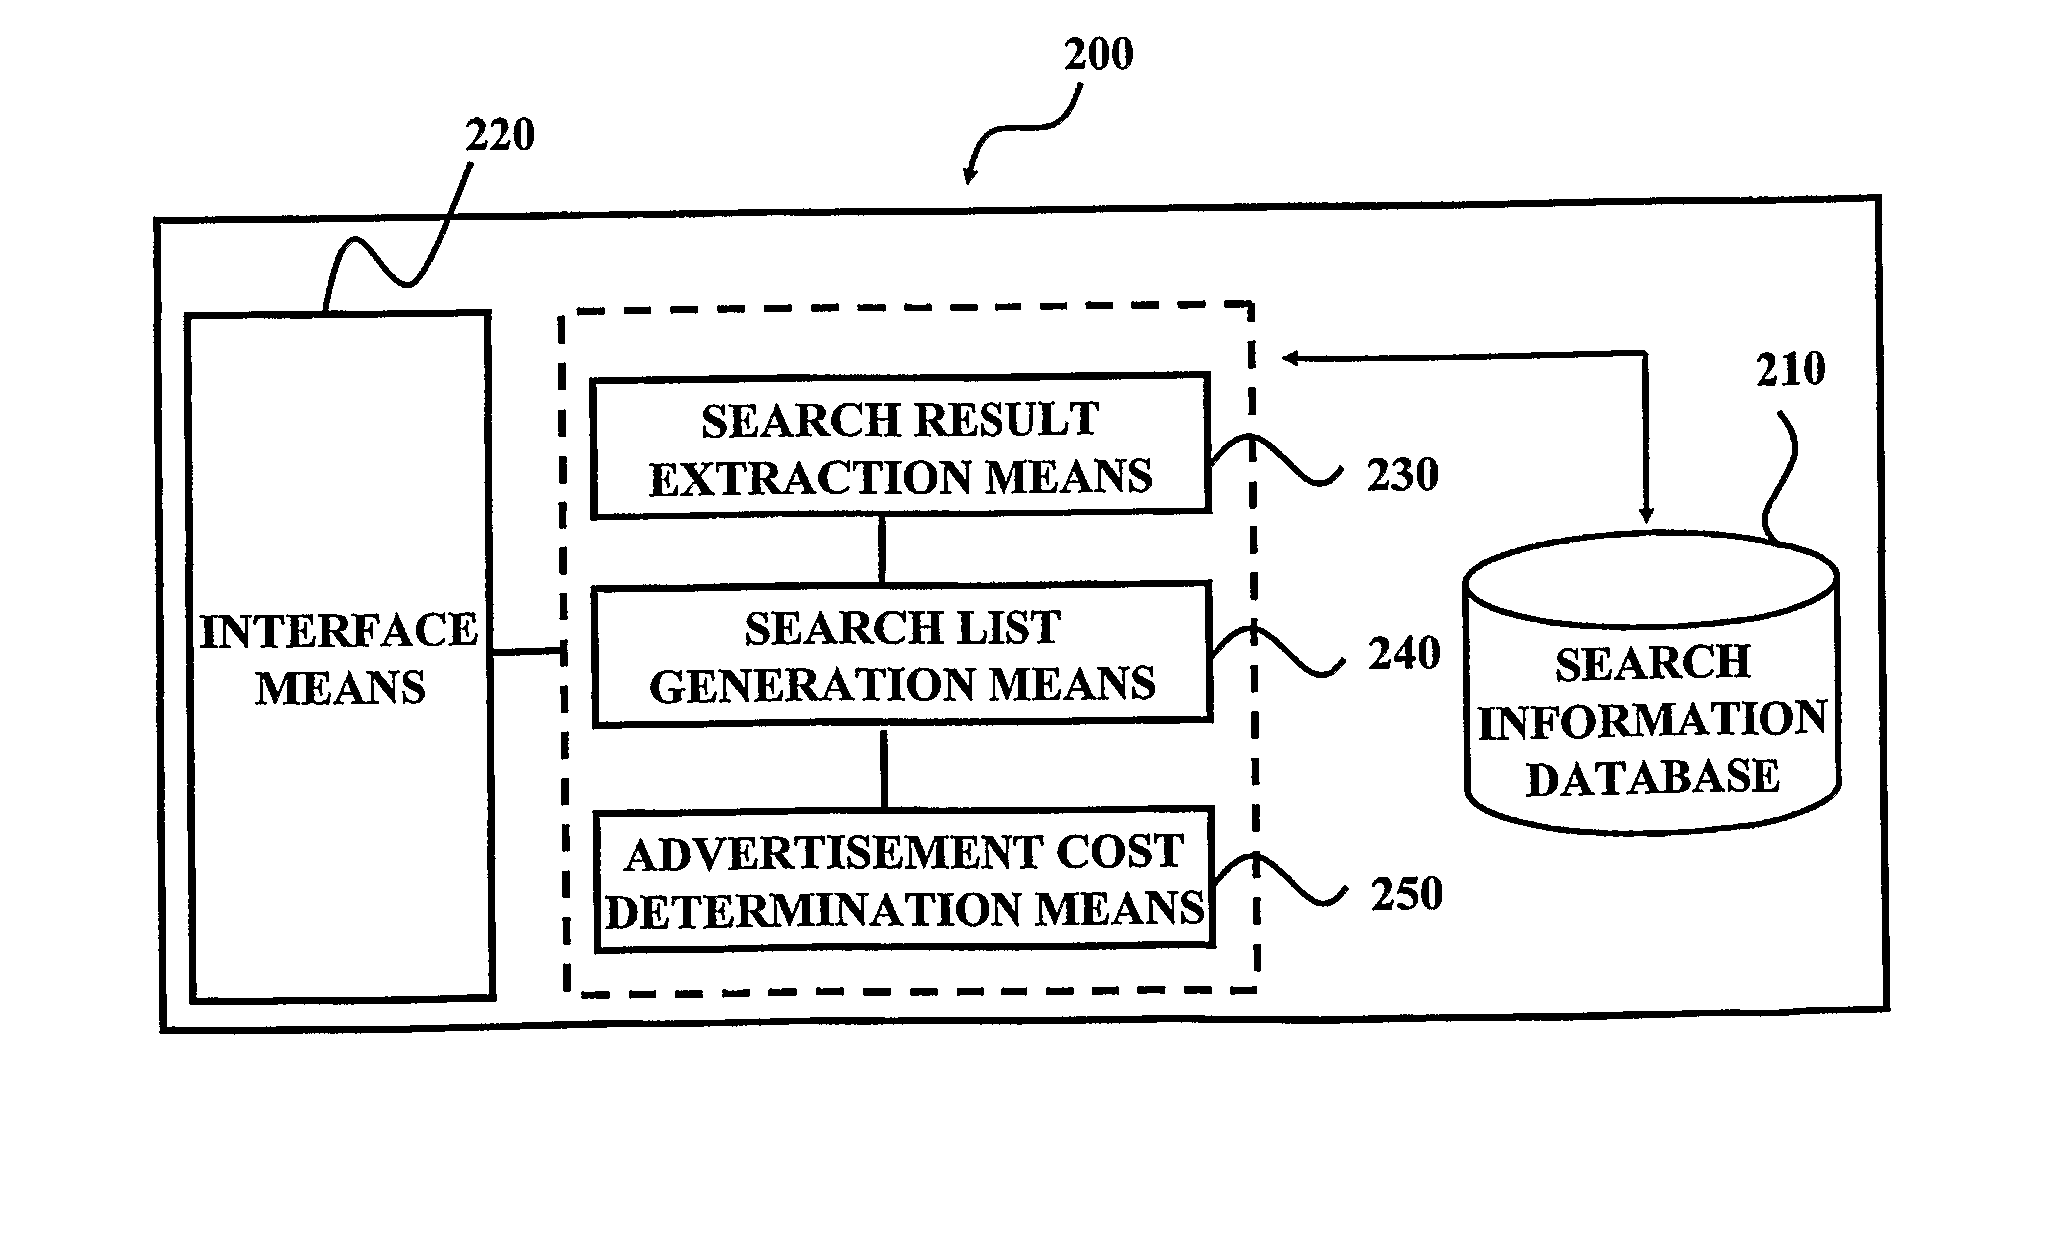 Method and System for Selecting Search List Table in Internet Search Engine in Response to Search Request